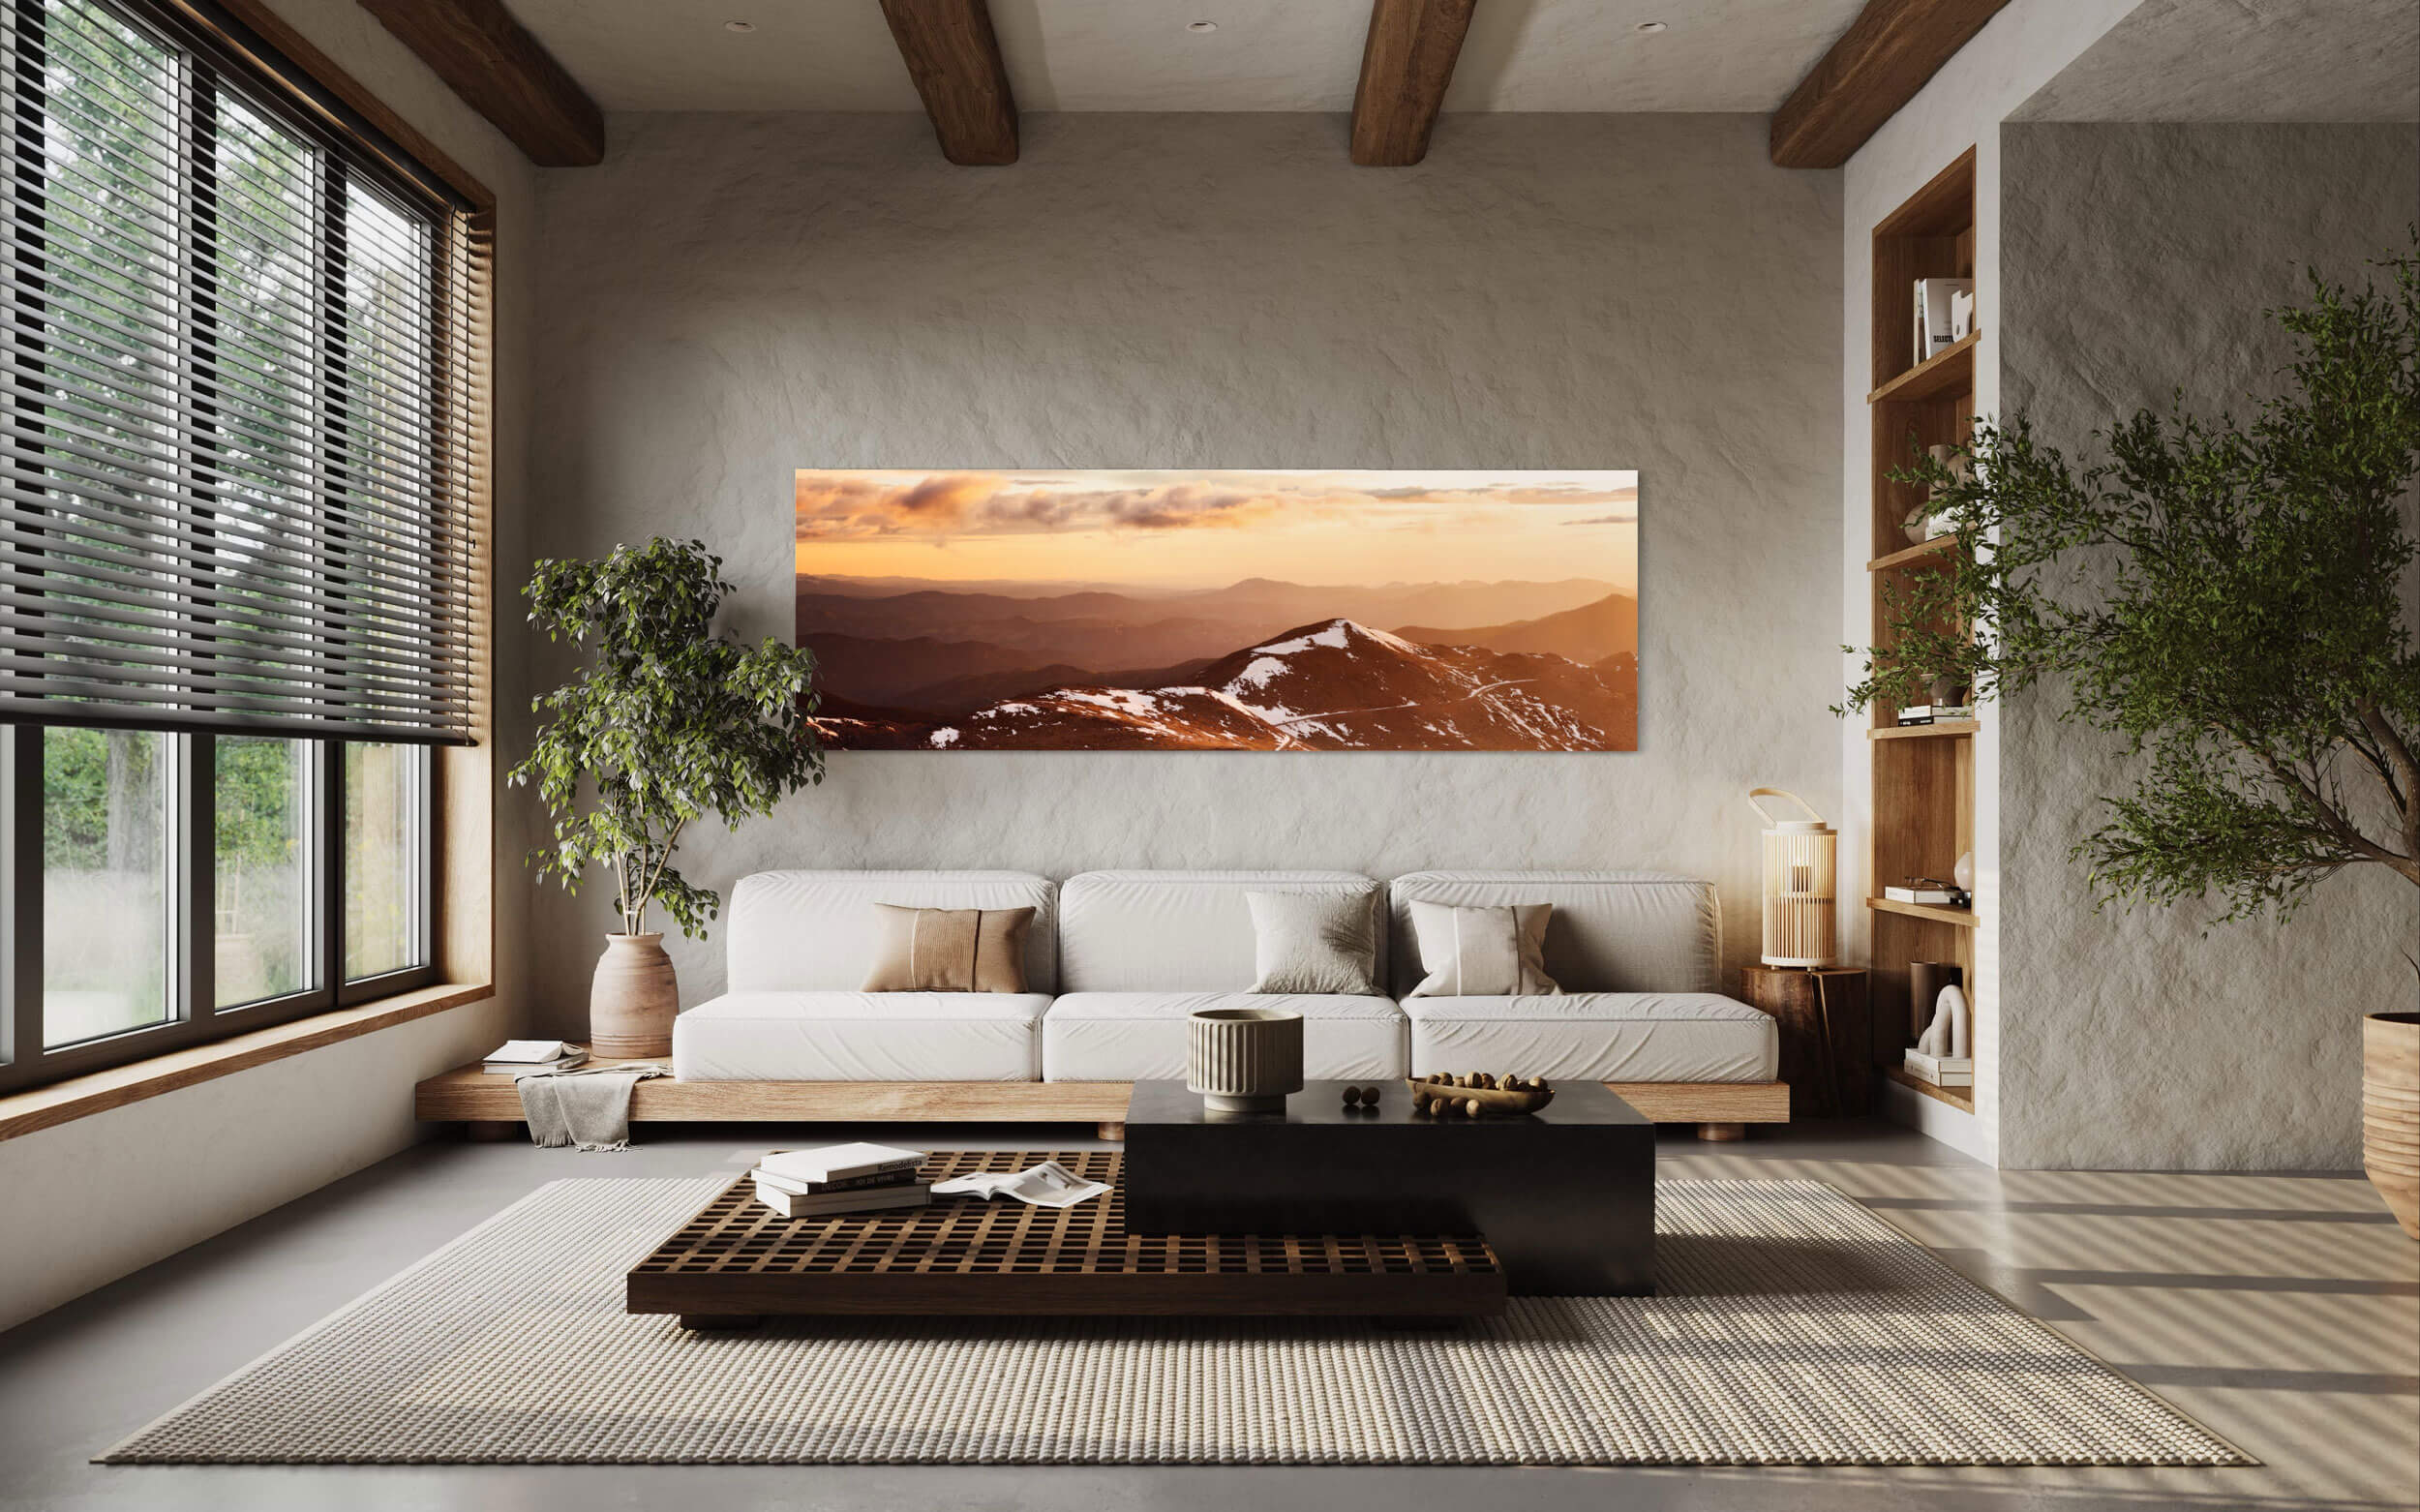 A piece of Colorado art showing a sunrise from Mount Evans hangs in a living room.